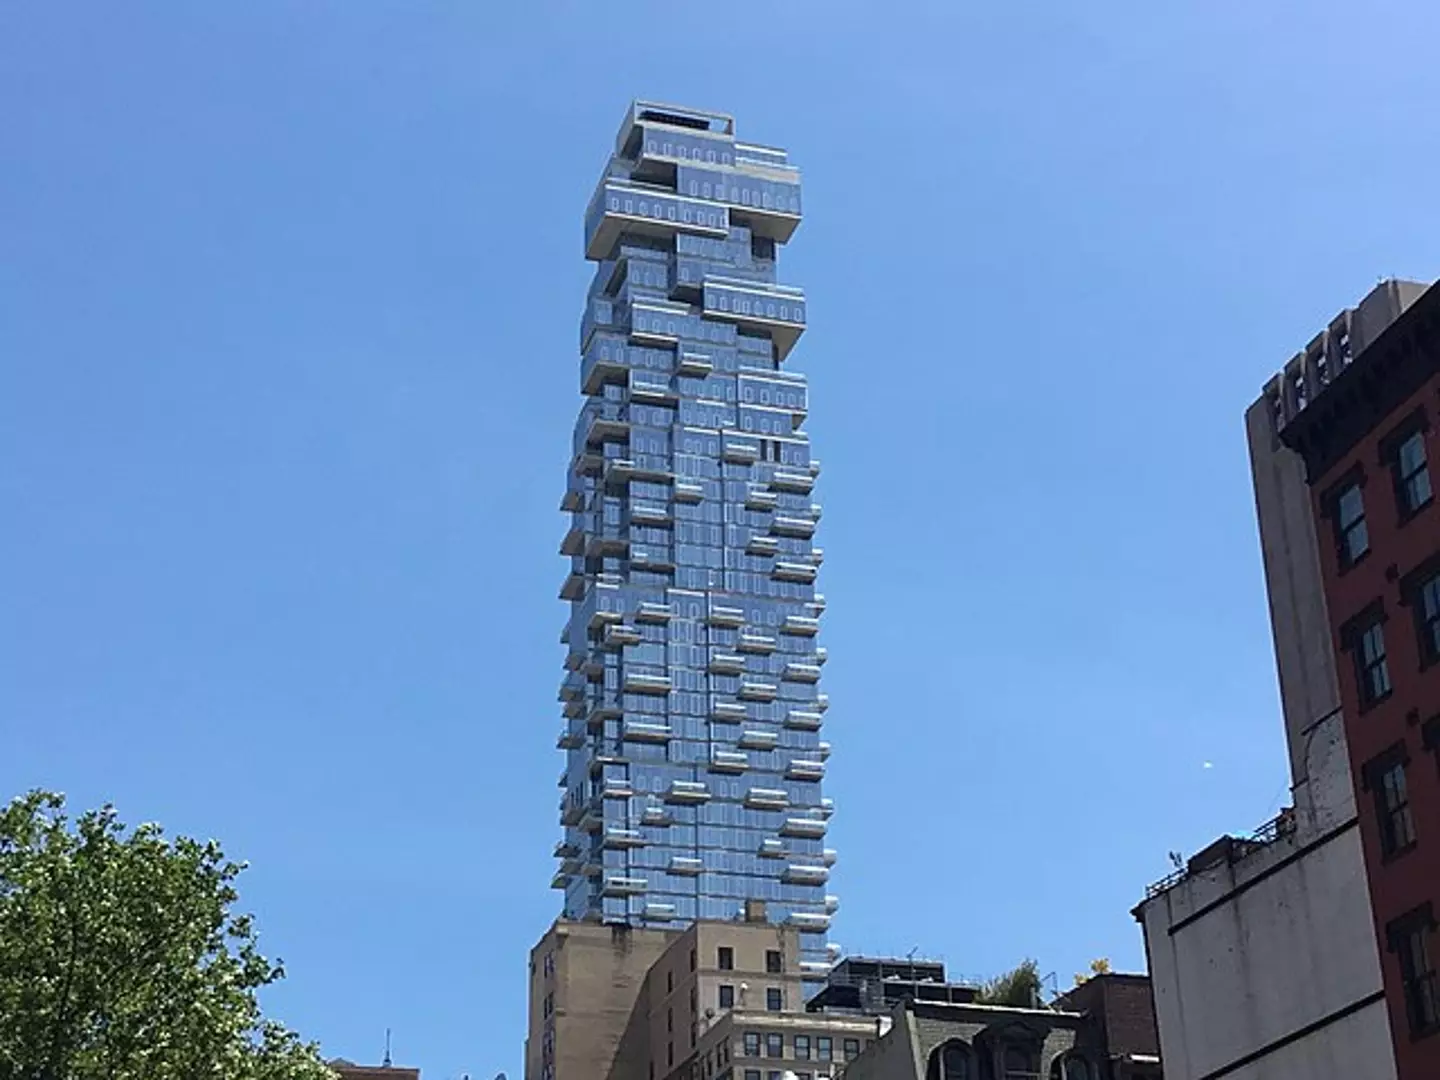 The skyscraper is nicknamed the 'Jenga Building' due to its resemblance to the Jenga game.